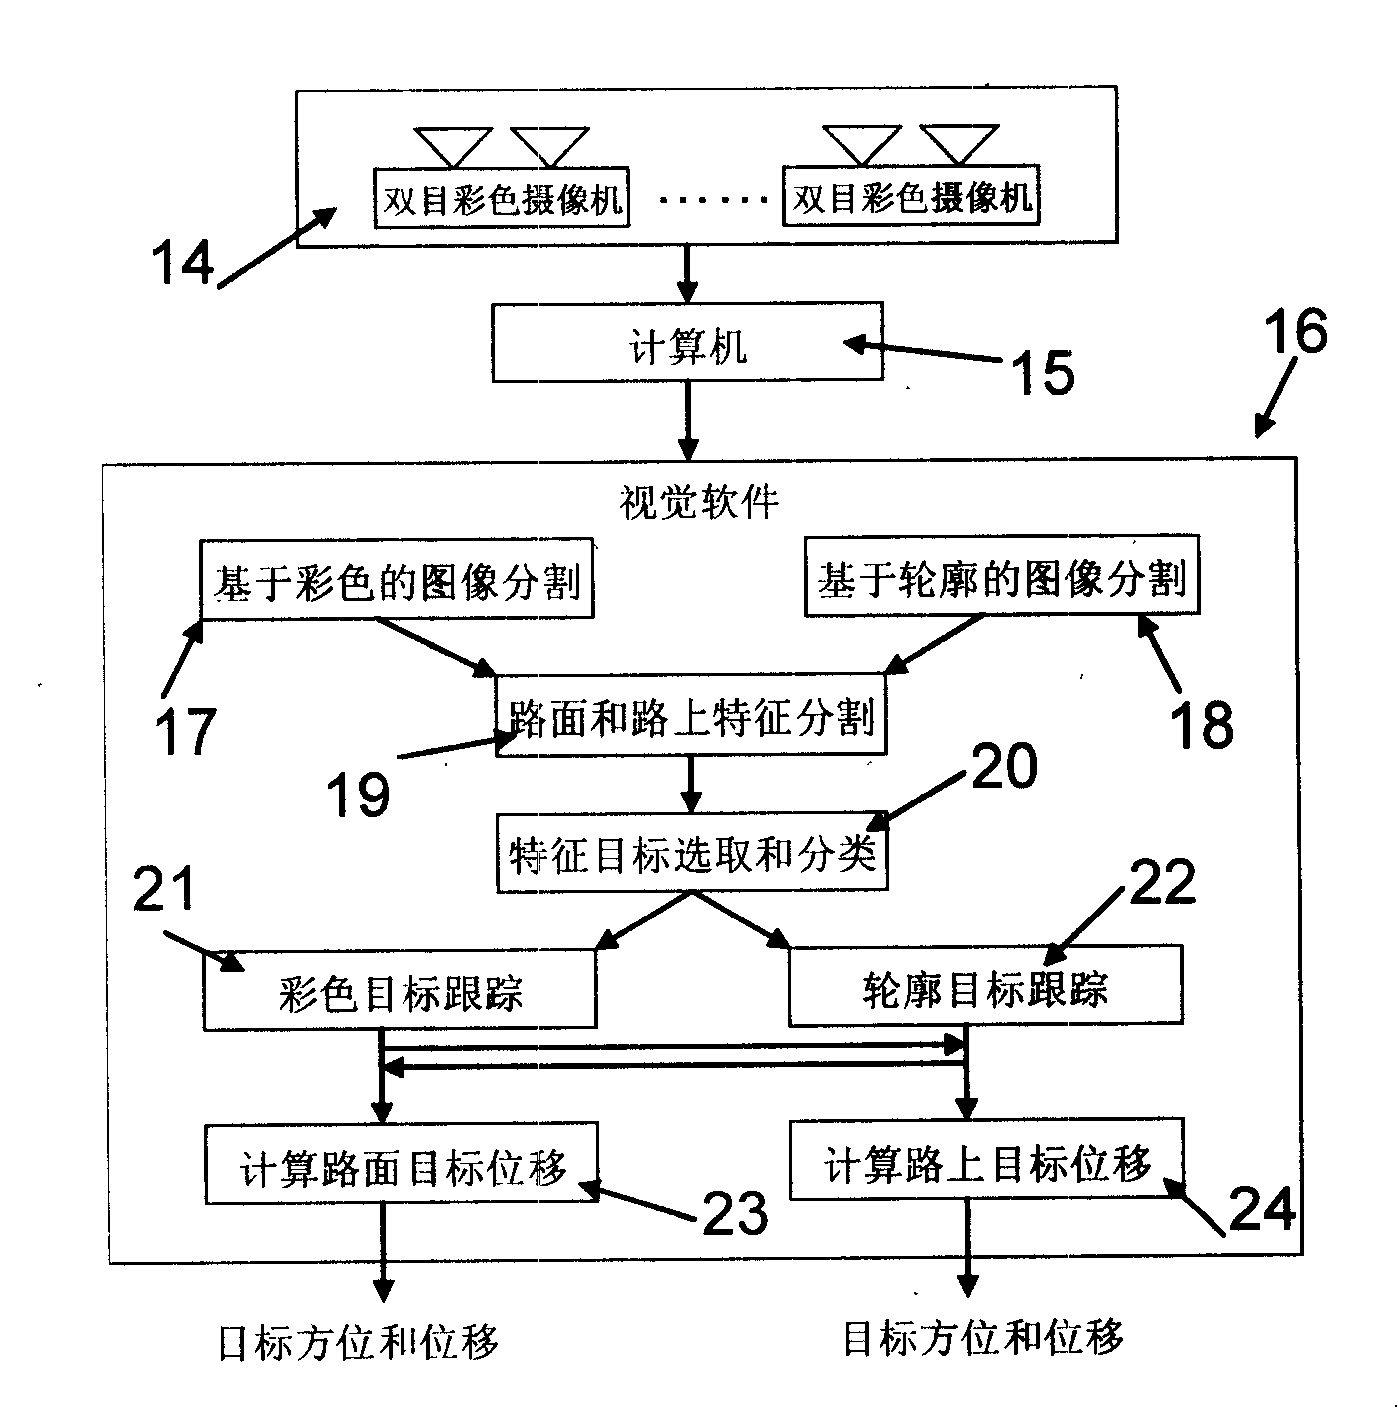 Assistant navigation of intelligent vehicle and automatically concurrently assisted driving system